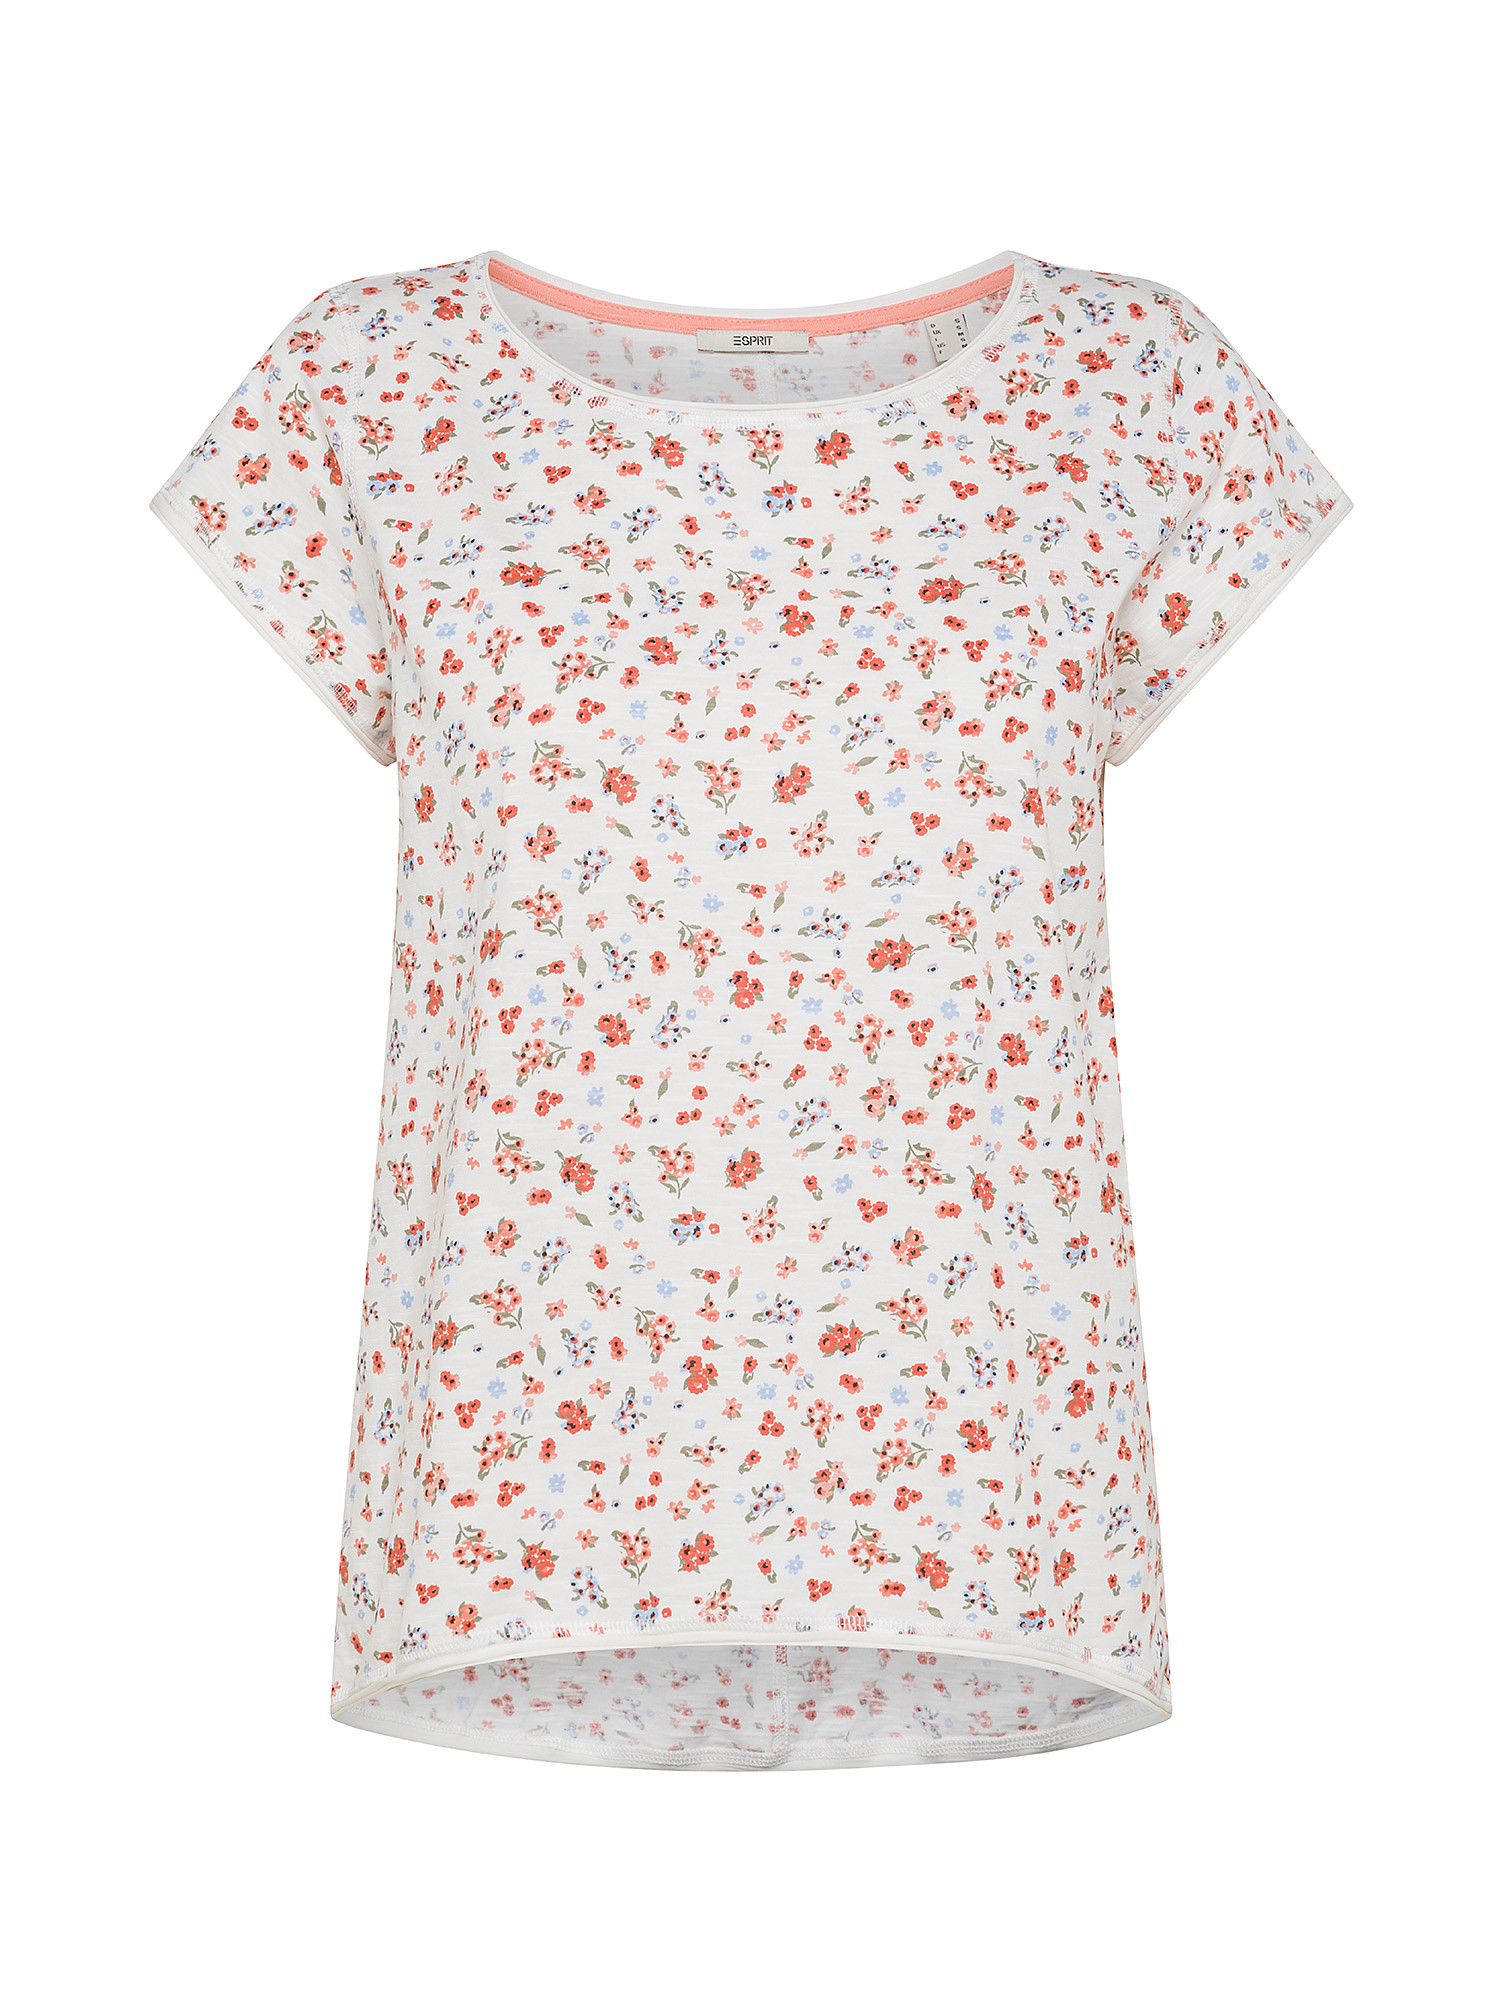 Esprit - Cotton T-shirt with all over print, White, large image number 0